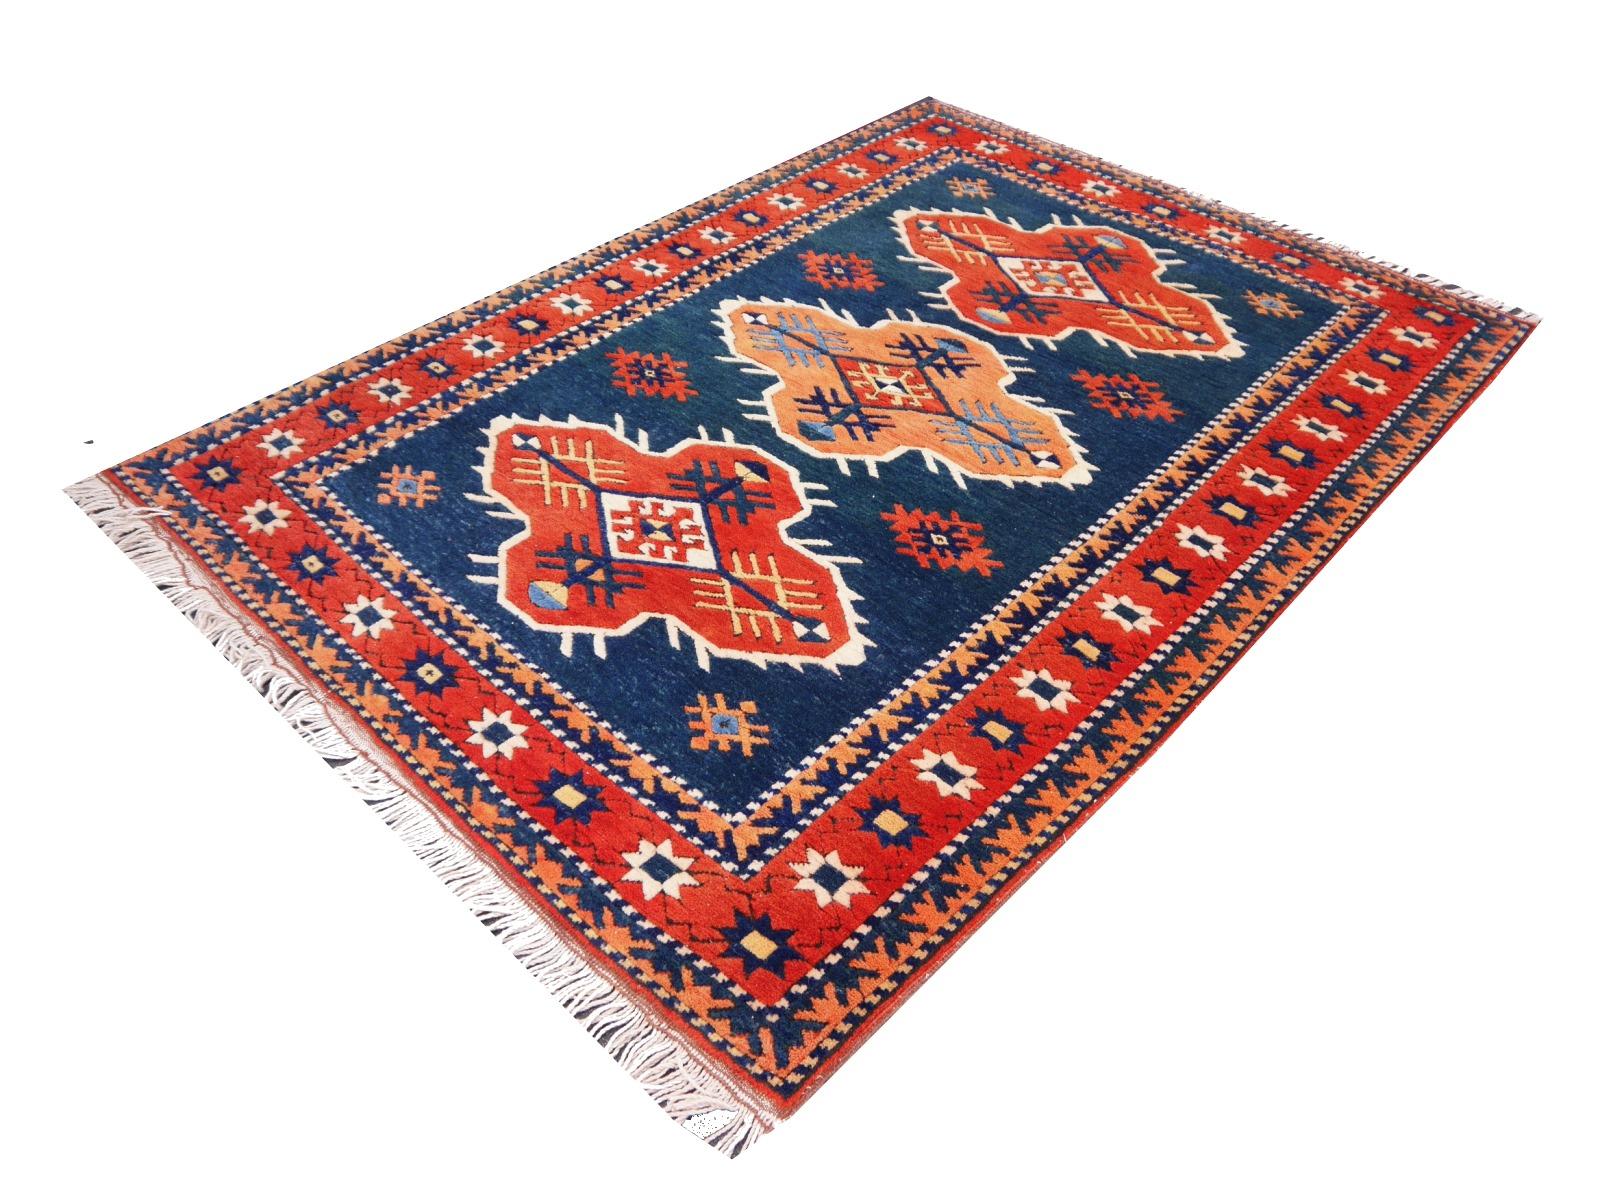 Turkish Azeri Rug Vintage with Caucasian and Heriz Design Djoharian Collection In Excellent Condition For Sale In Lohr, Bavaria, DE